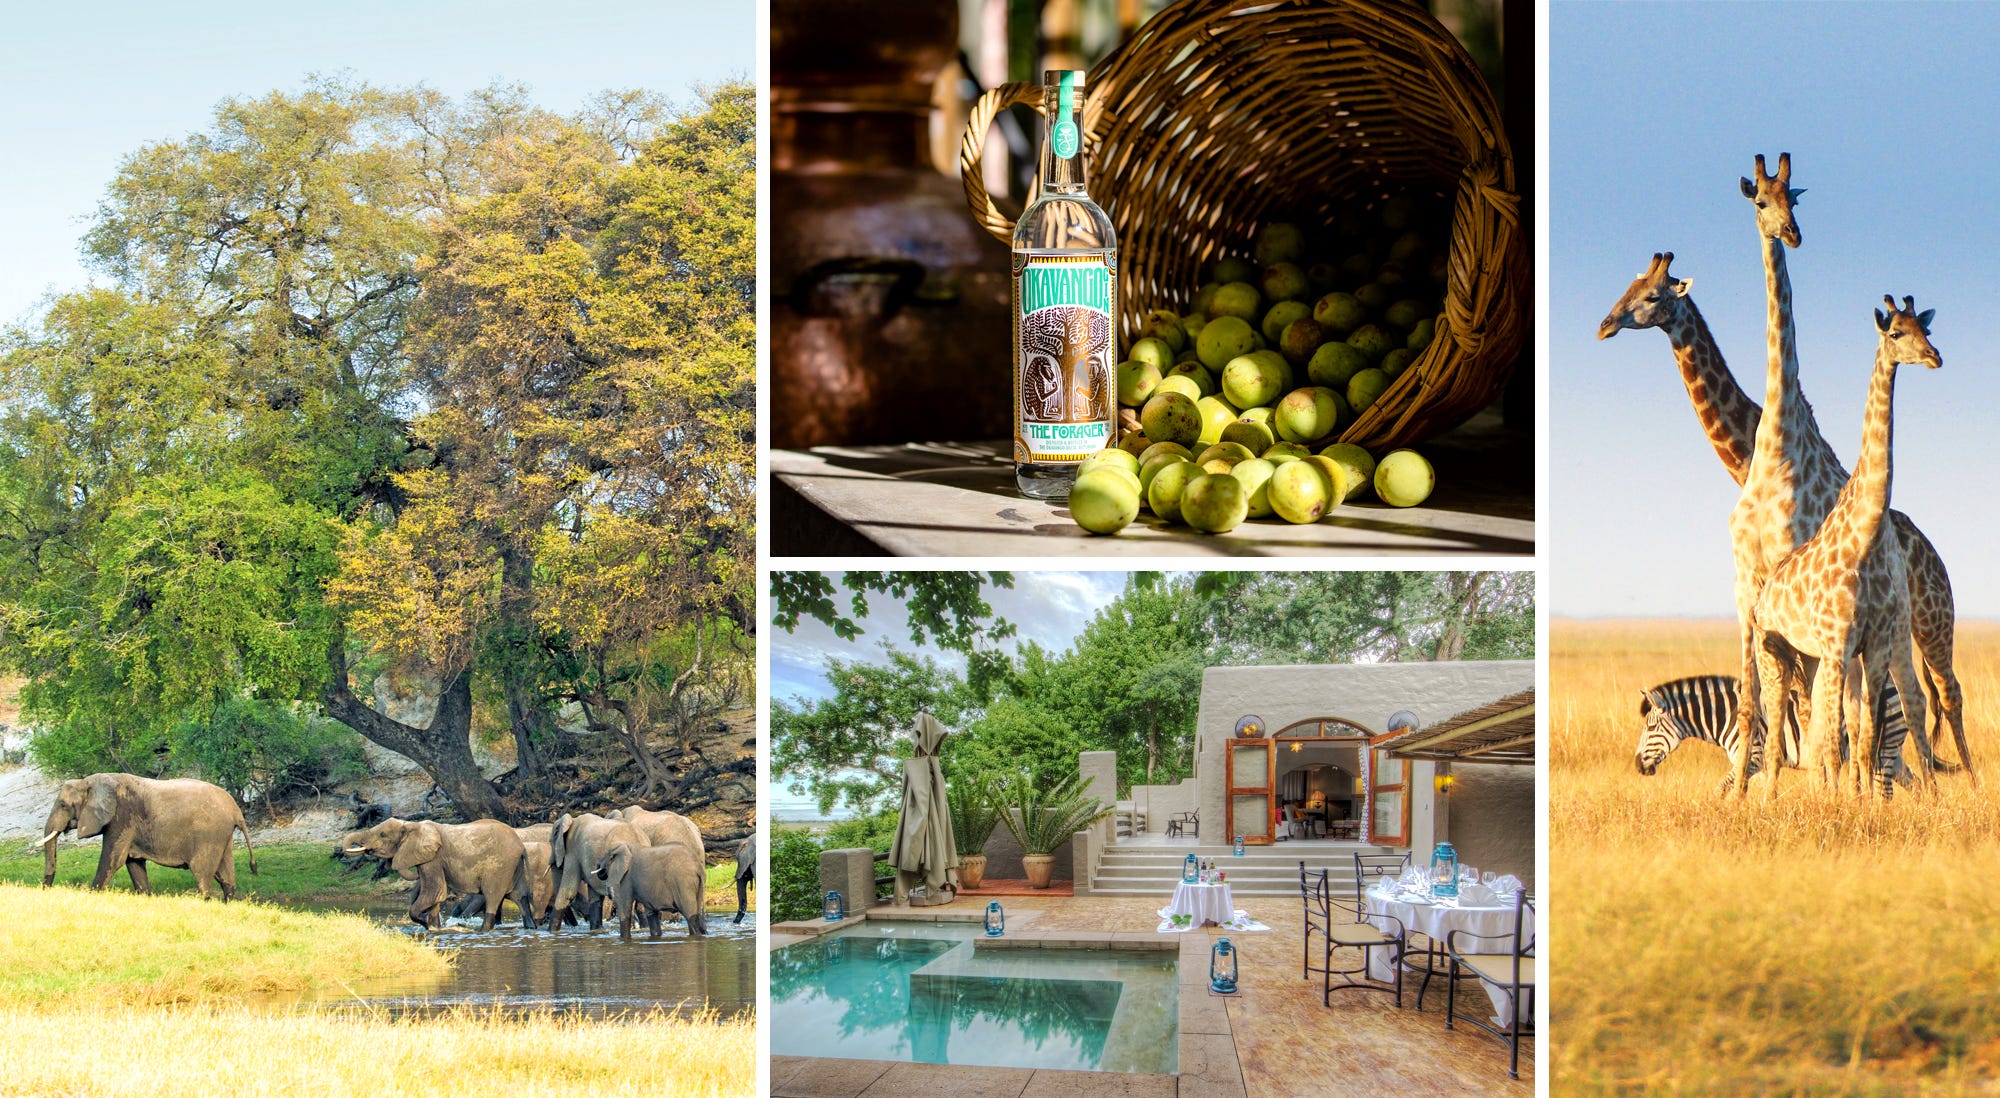 Renowned for its eco-tourism, the country has life-changing safaris and luxury resorts to boot.